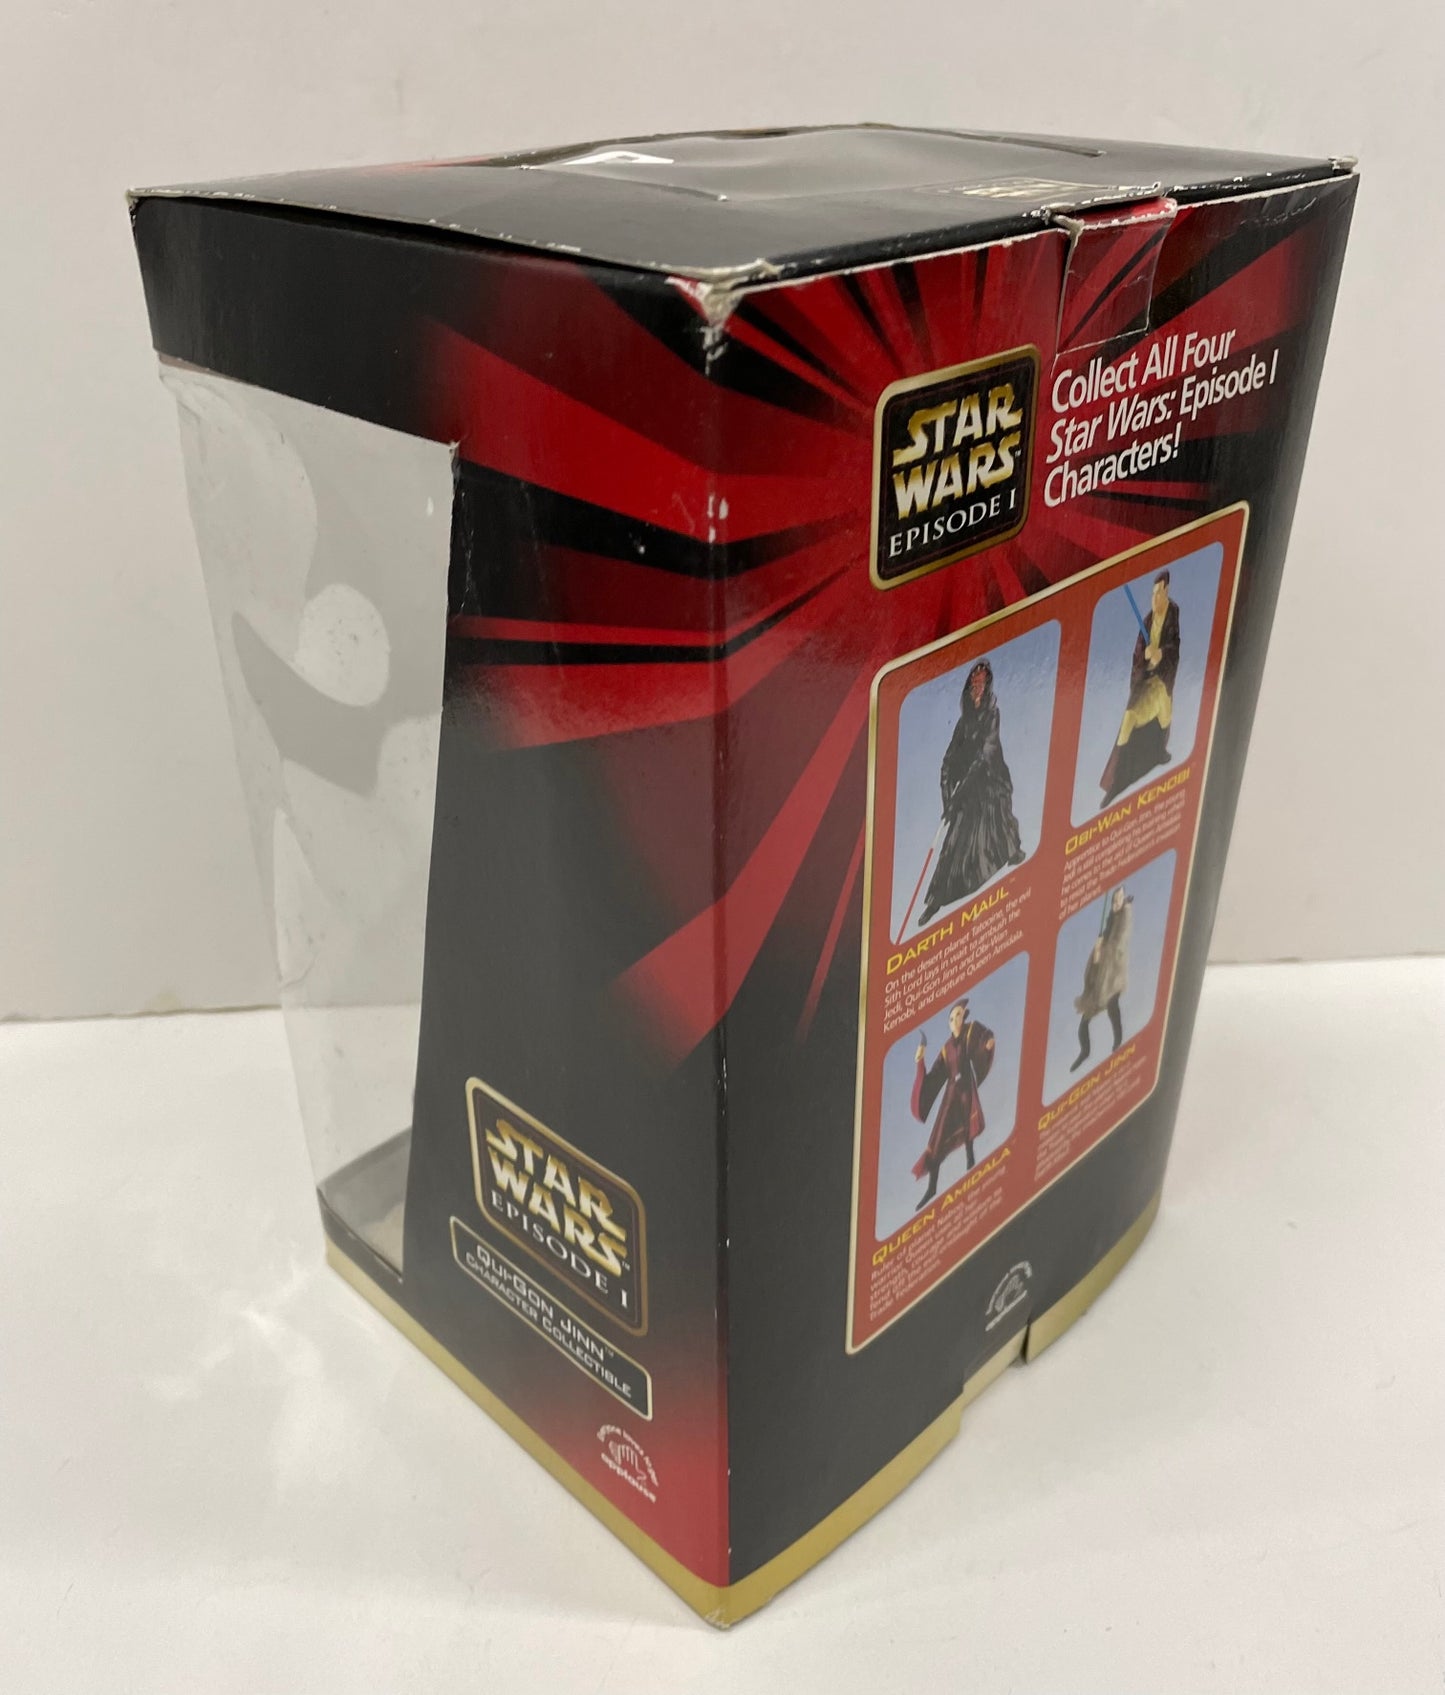 Episode 1 Qui Gon Jinn Character Collectible Figure, Applause 1999